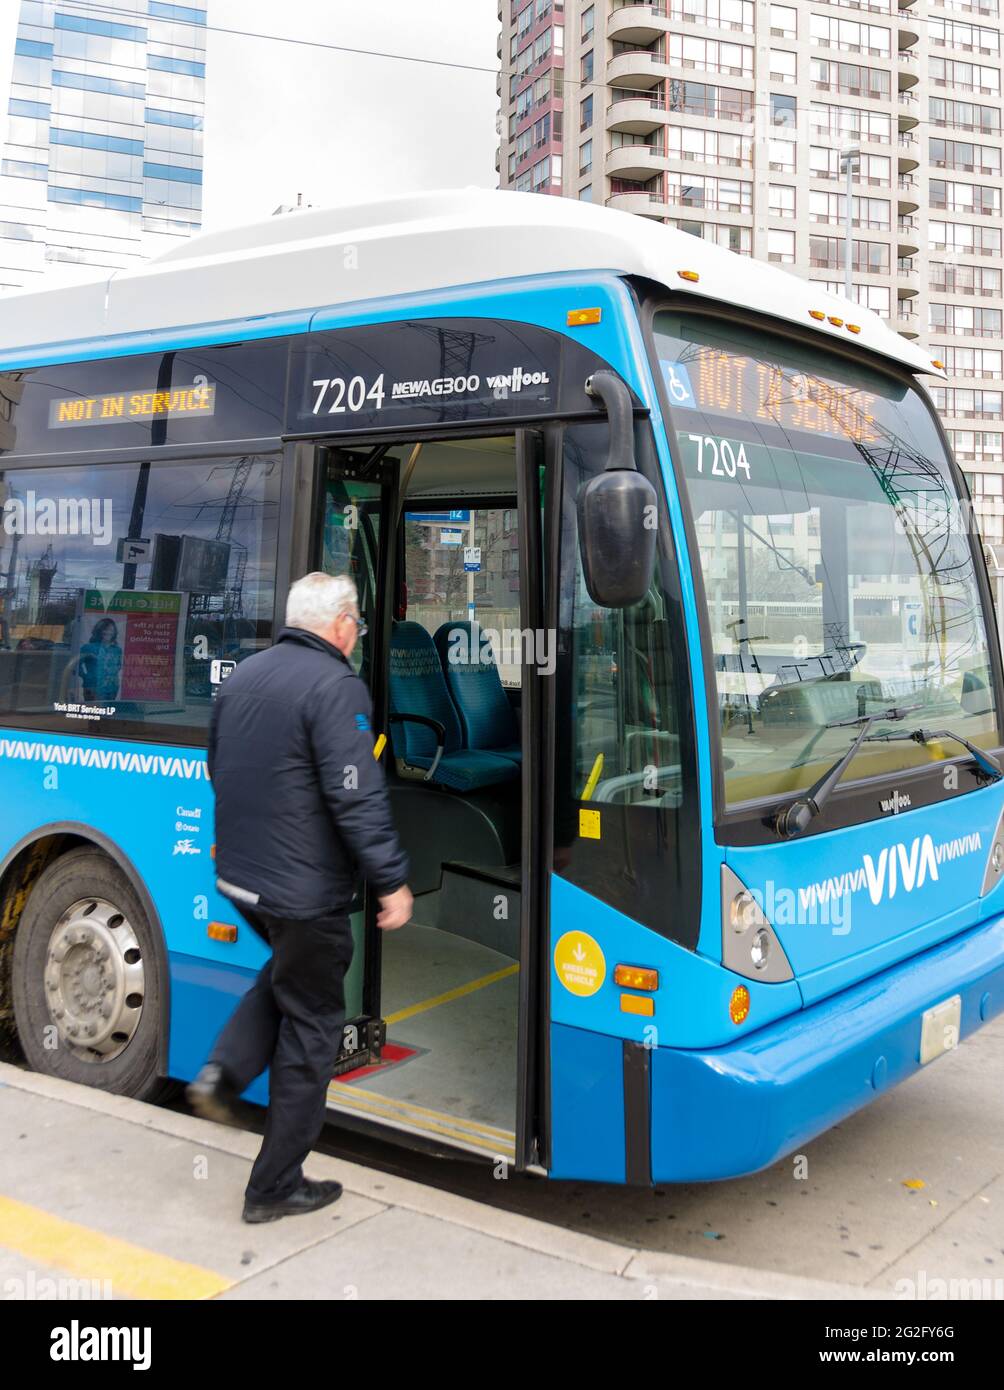 Viva is a bus rapid transit service operating in York Region in ,Ontario. Viva service is integrated with York Region Transit's local bus service to o Stock Photo